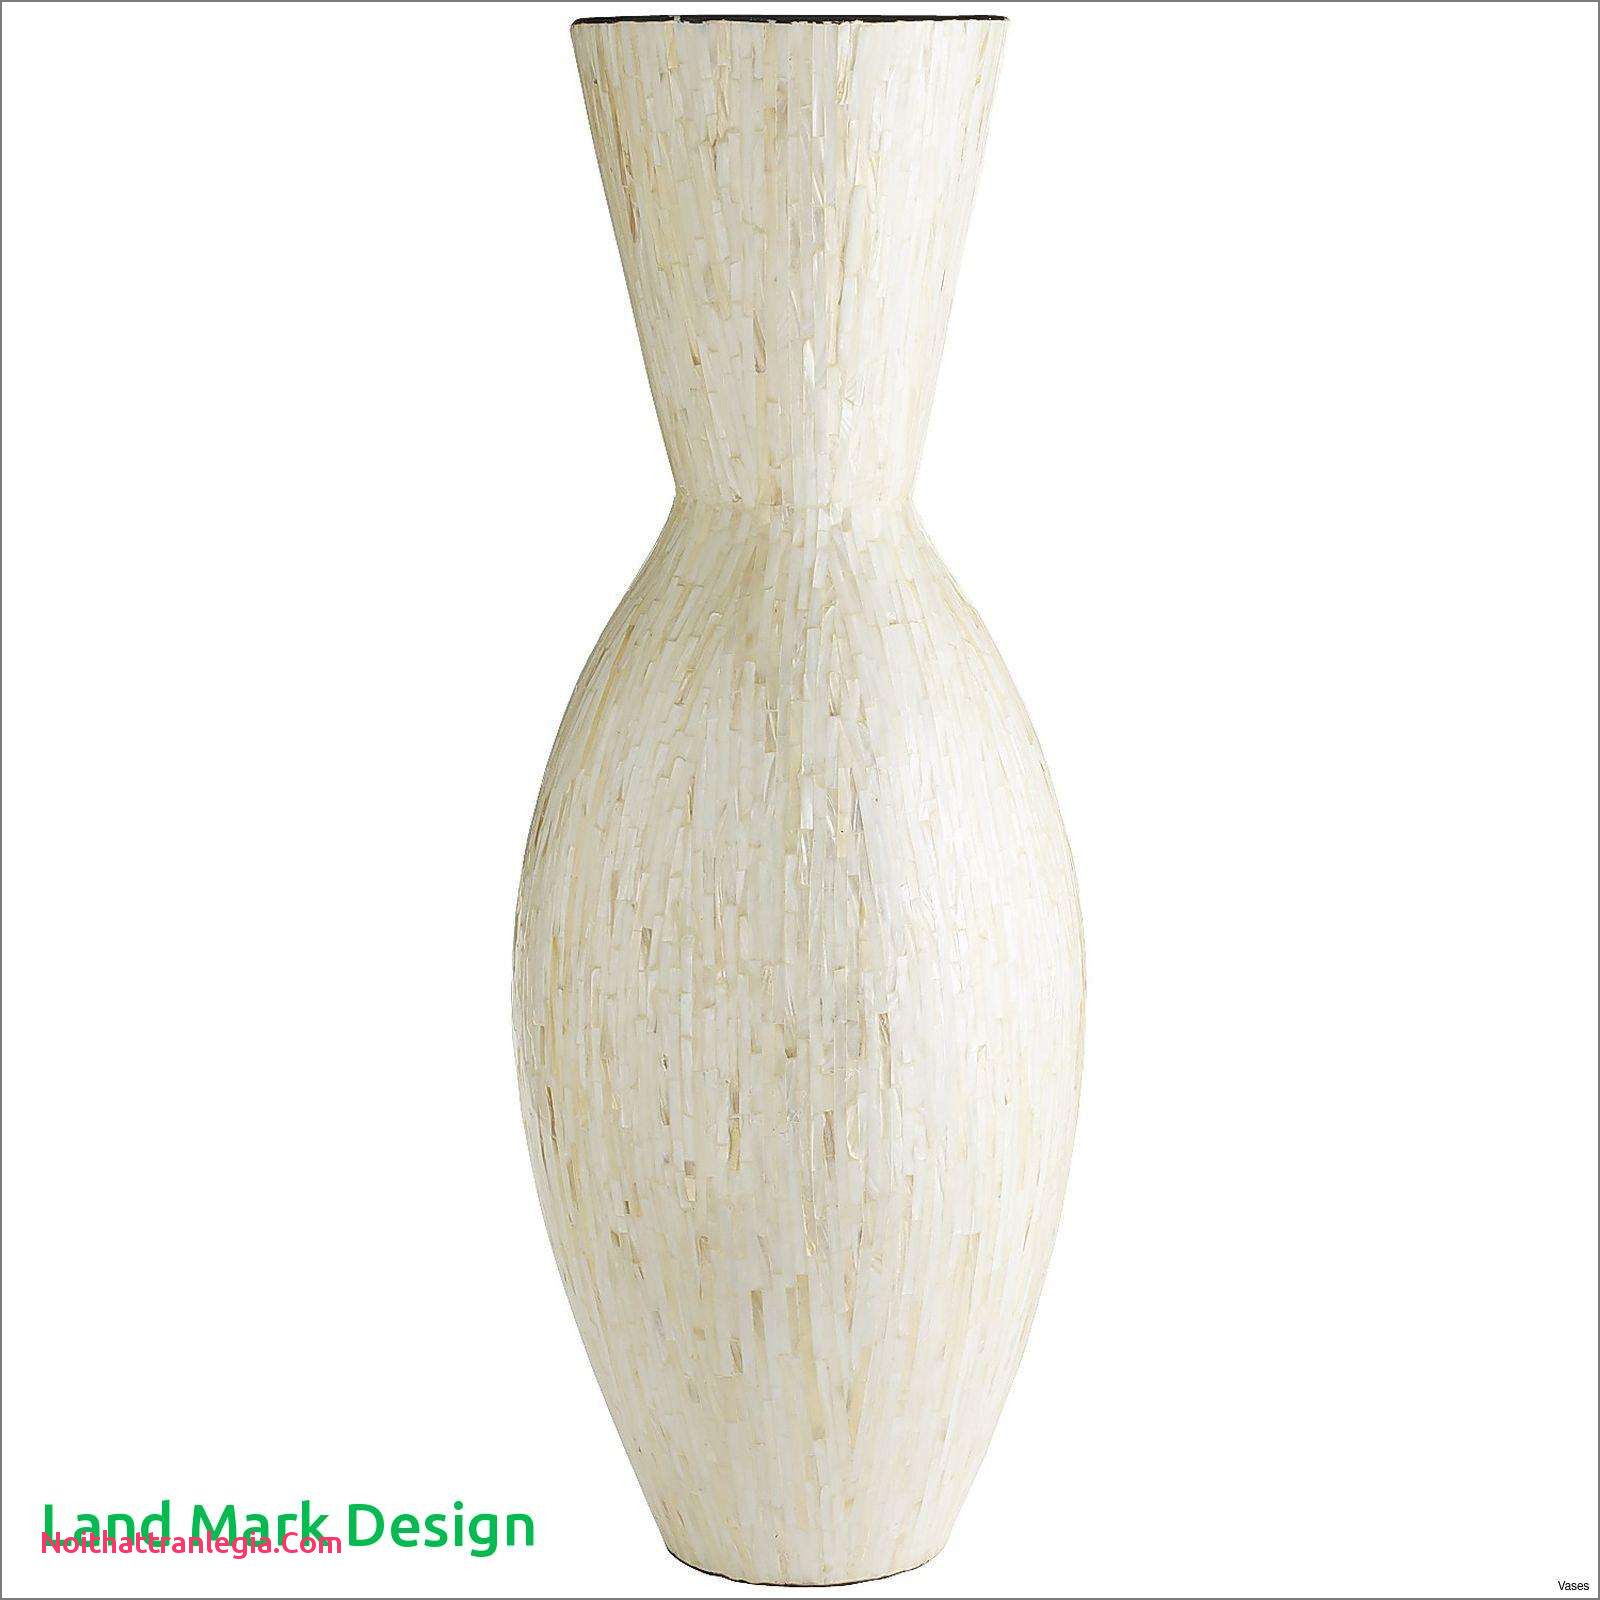 21 Lovable Extra Large Floor Vases 2024 free download extra large floor vases of 20 large floor vase nz noithattranlegia vases design throughout full size of living room floor vases tall luxury d dkbrw 5749 1h vases tall large